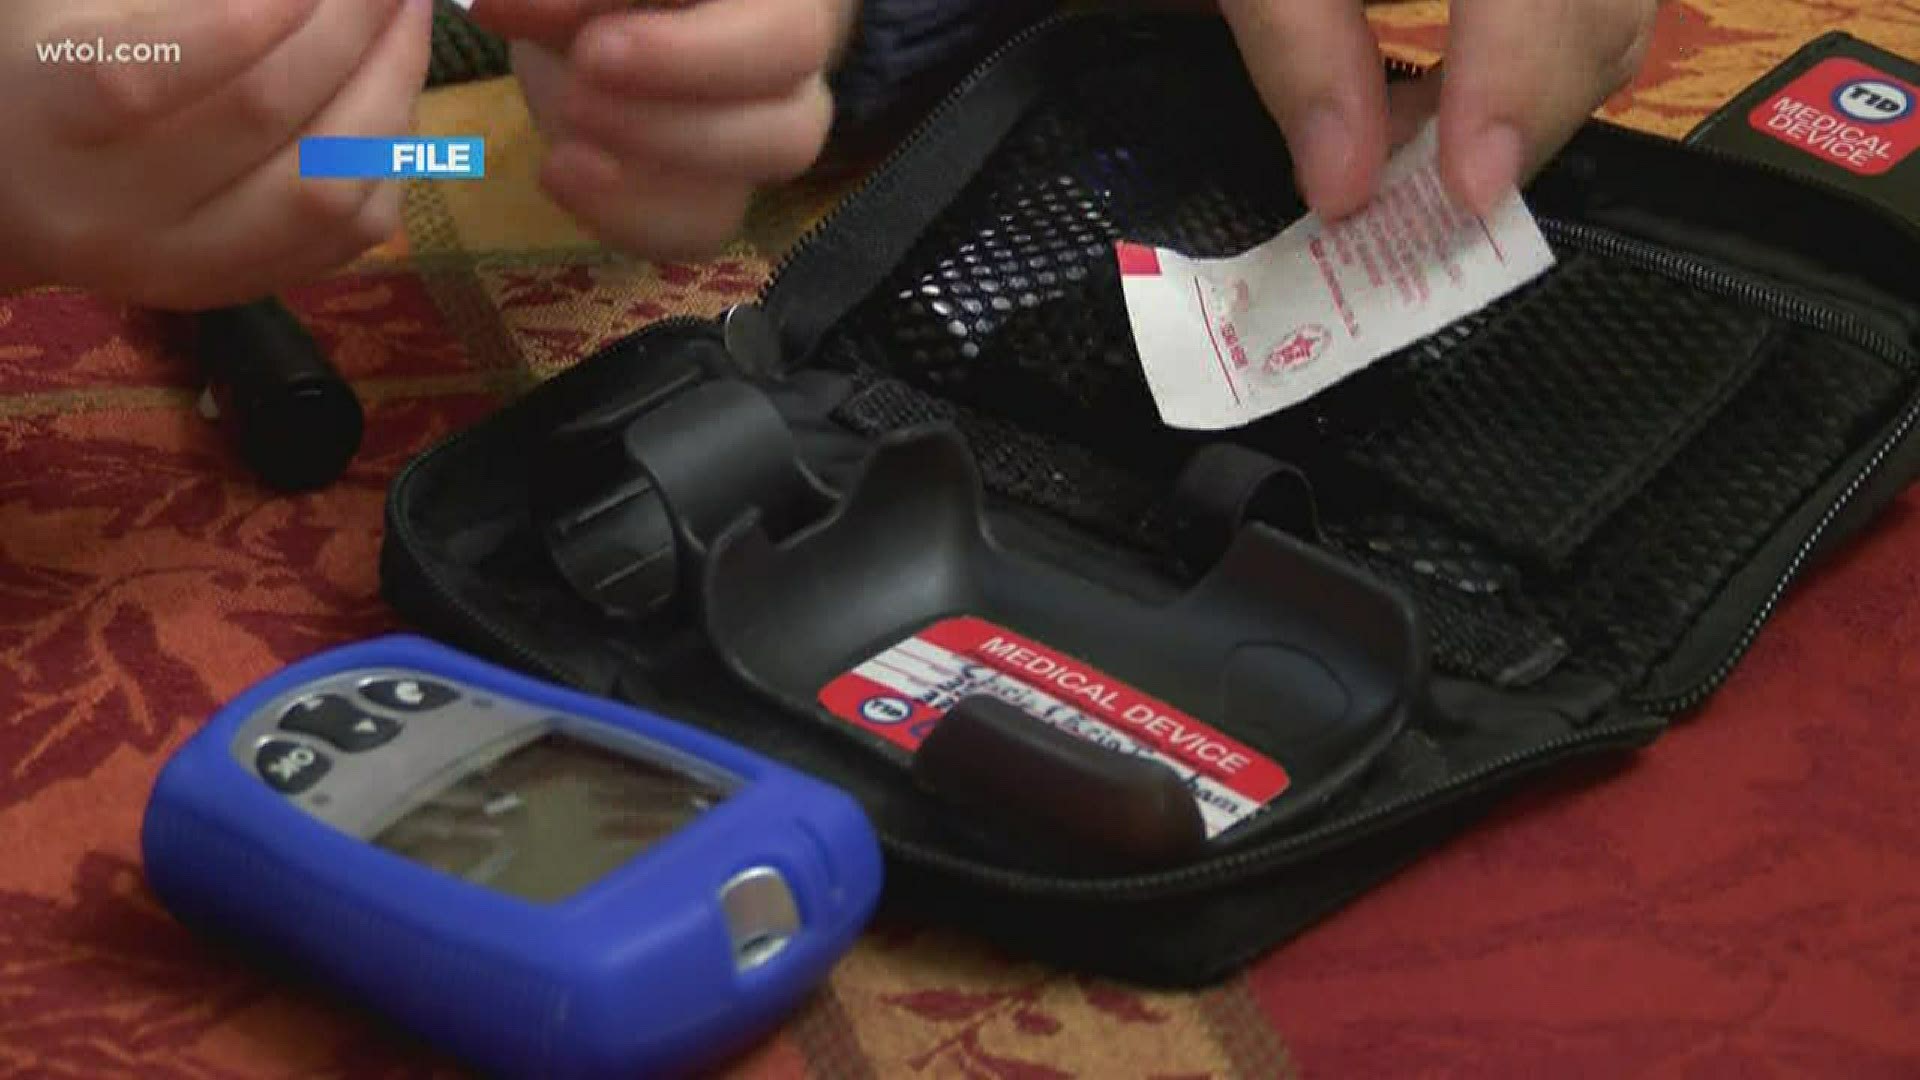 A pharmacist who specializes in diabetes says many here struggle to pay for insulin.